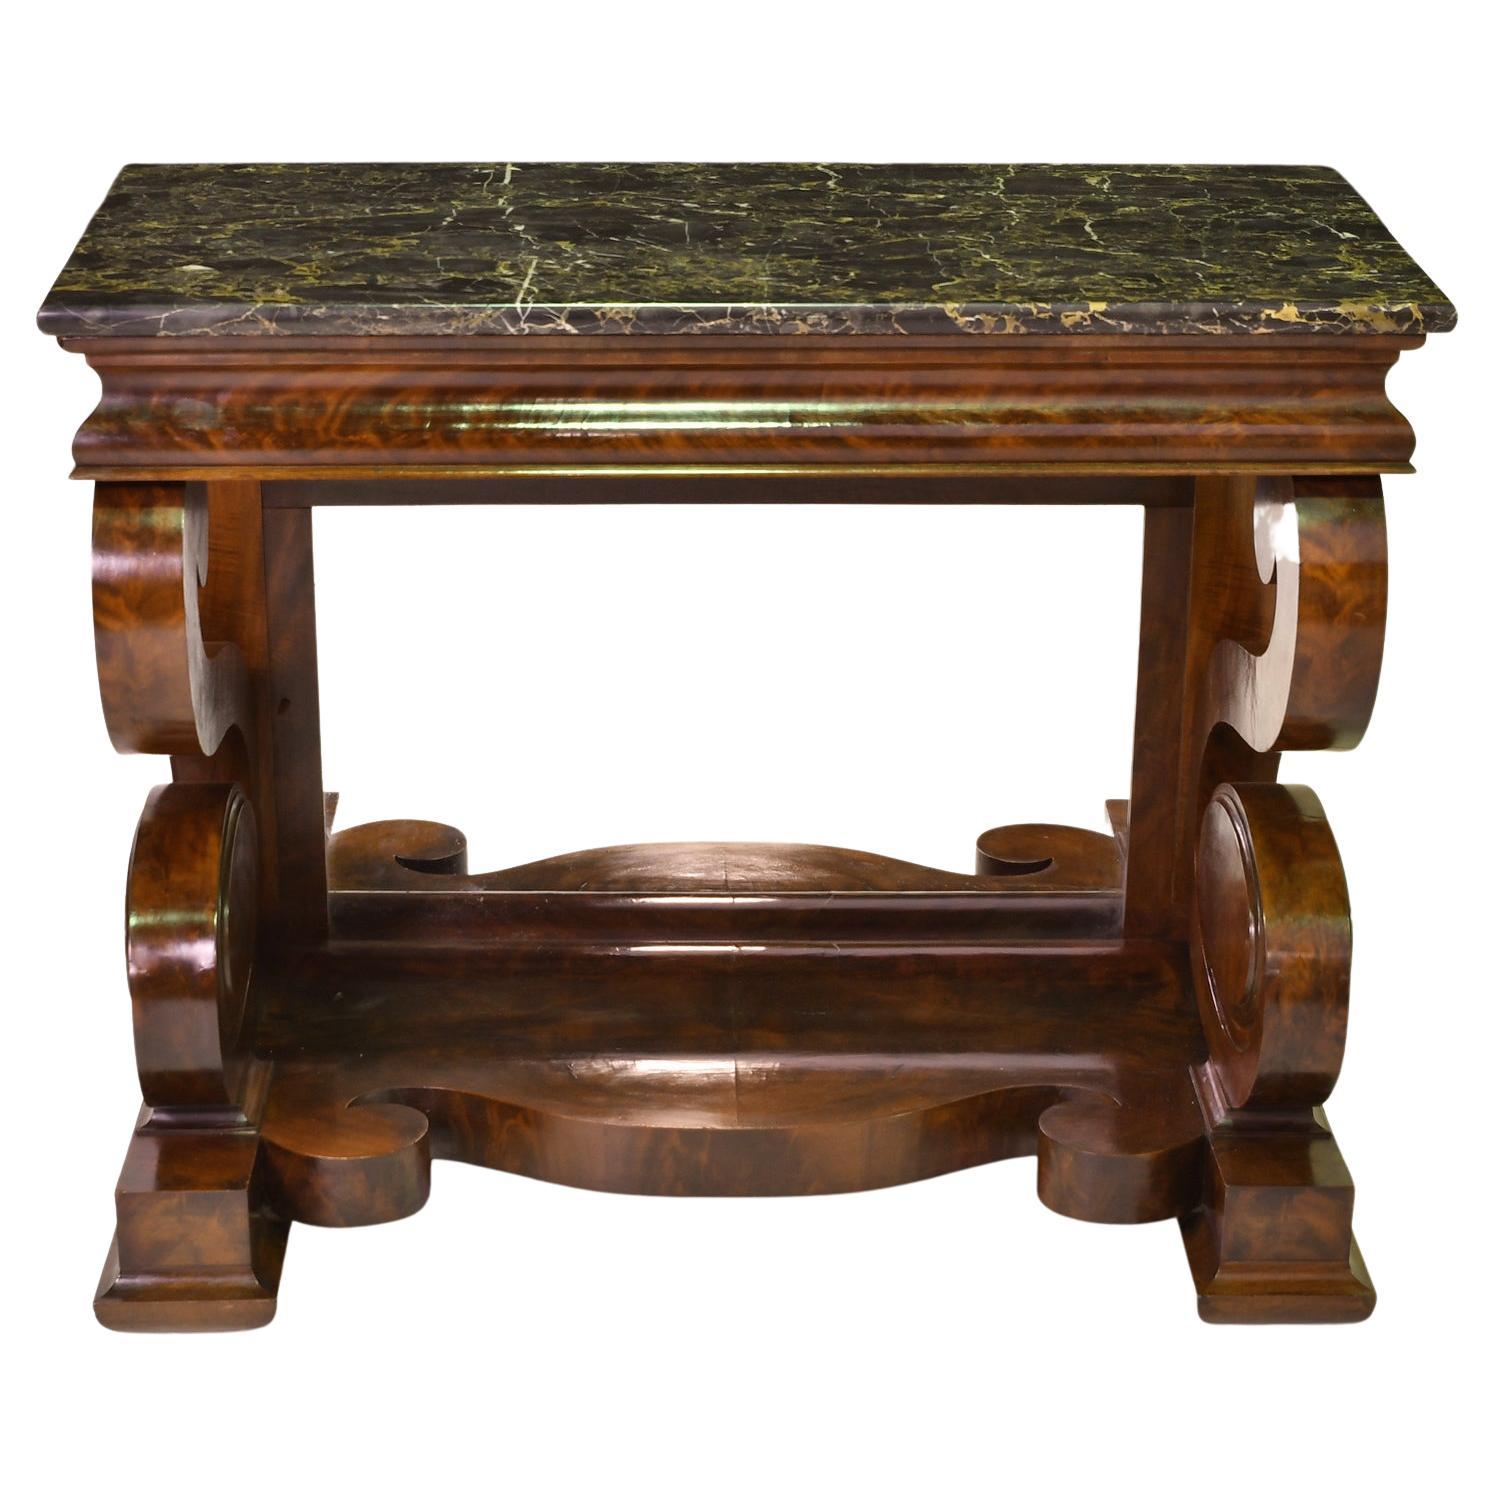 Attributable to the New York cabinetmaker, Joseph Meeks & Sons, a very beautiful American Empire console or pier table in the Grecian style in fine West Indies mahogany with Italian black, nero portoro marble top that has white & some warm gold